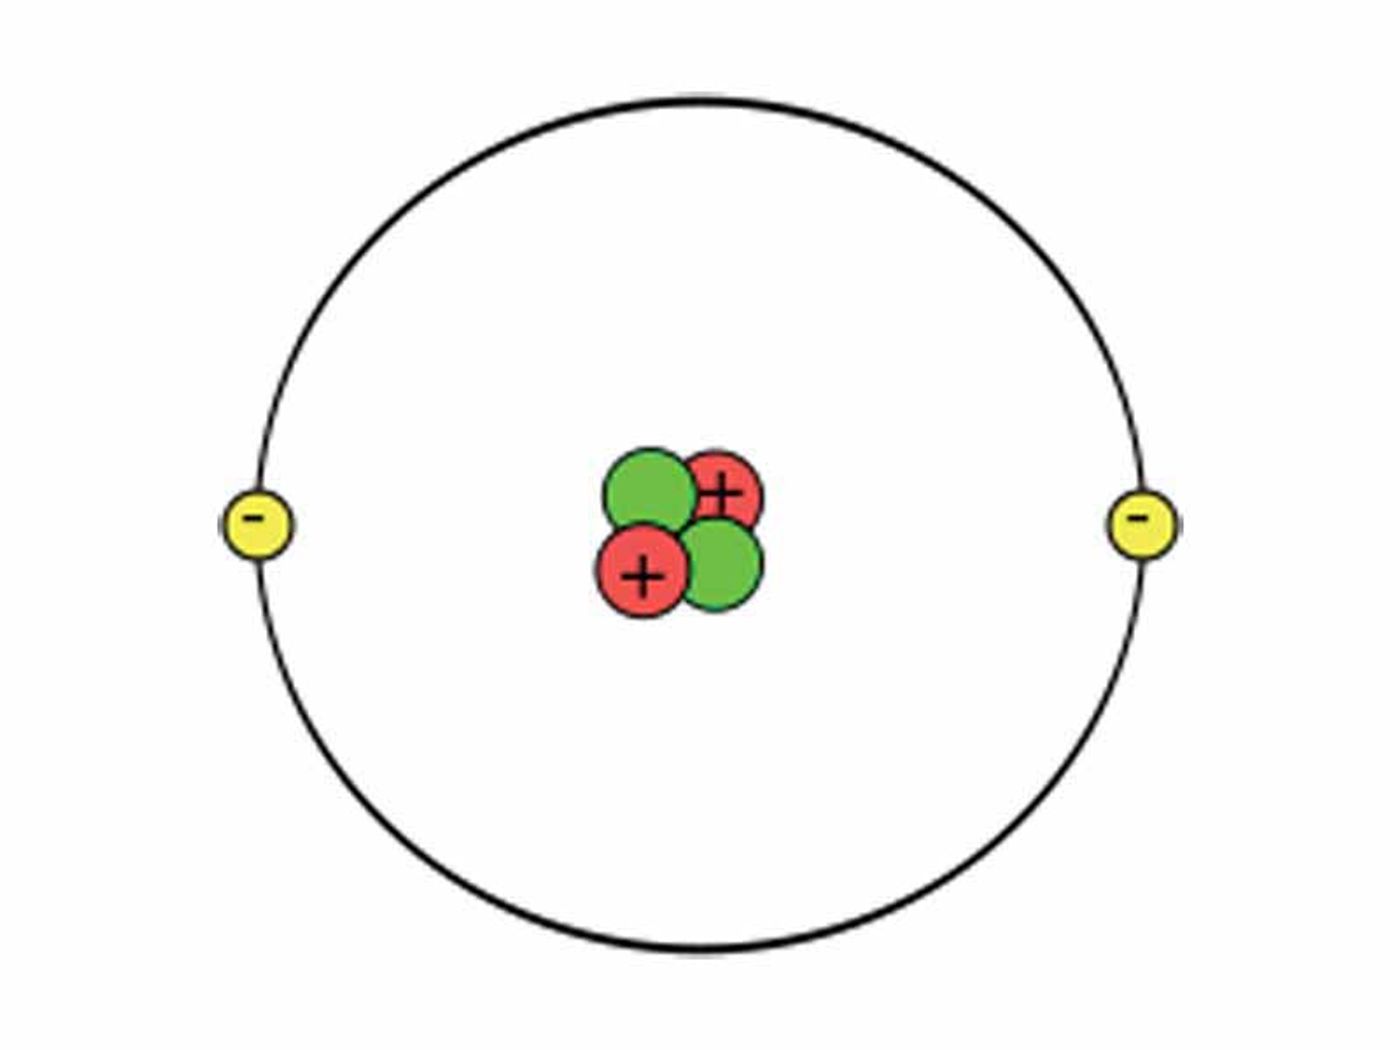 Helium Atom with 2 electrons on its single shell.